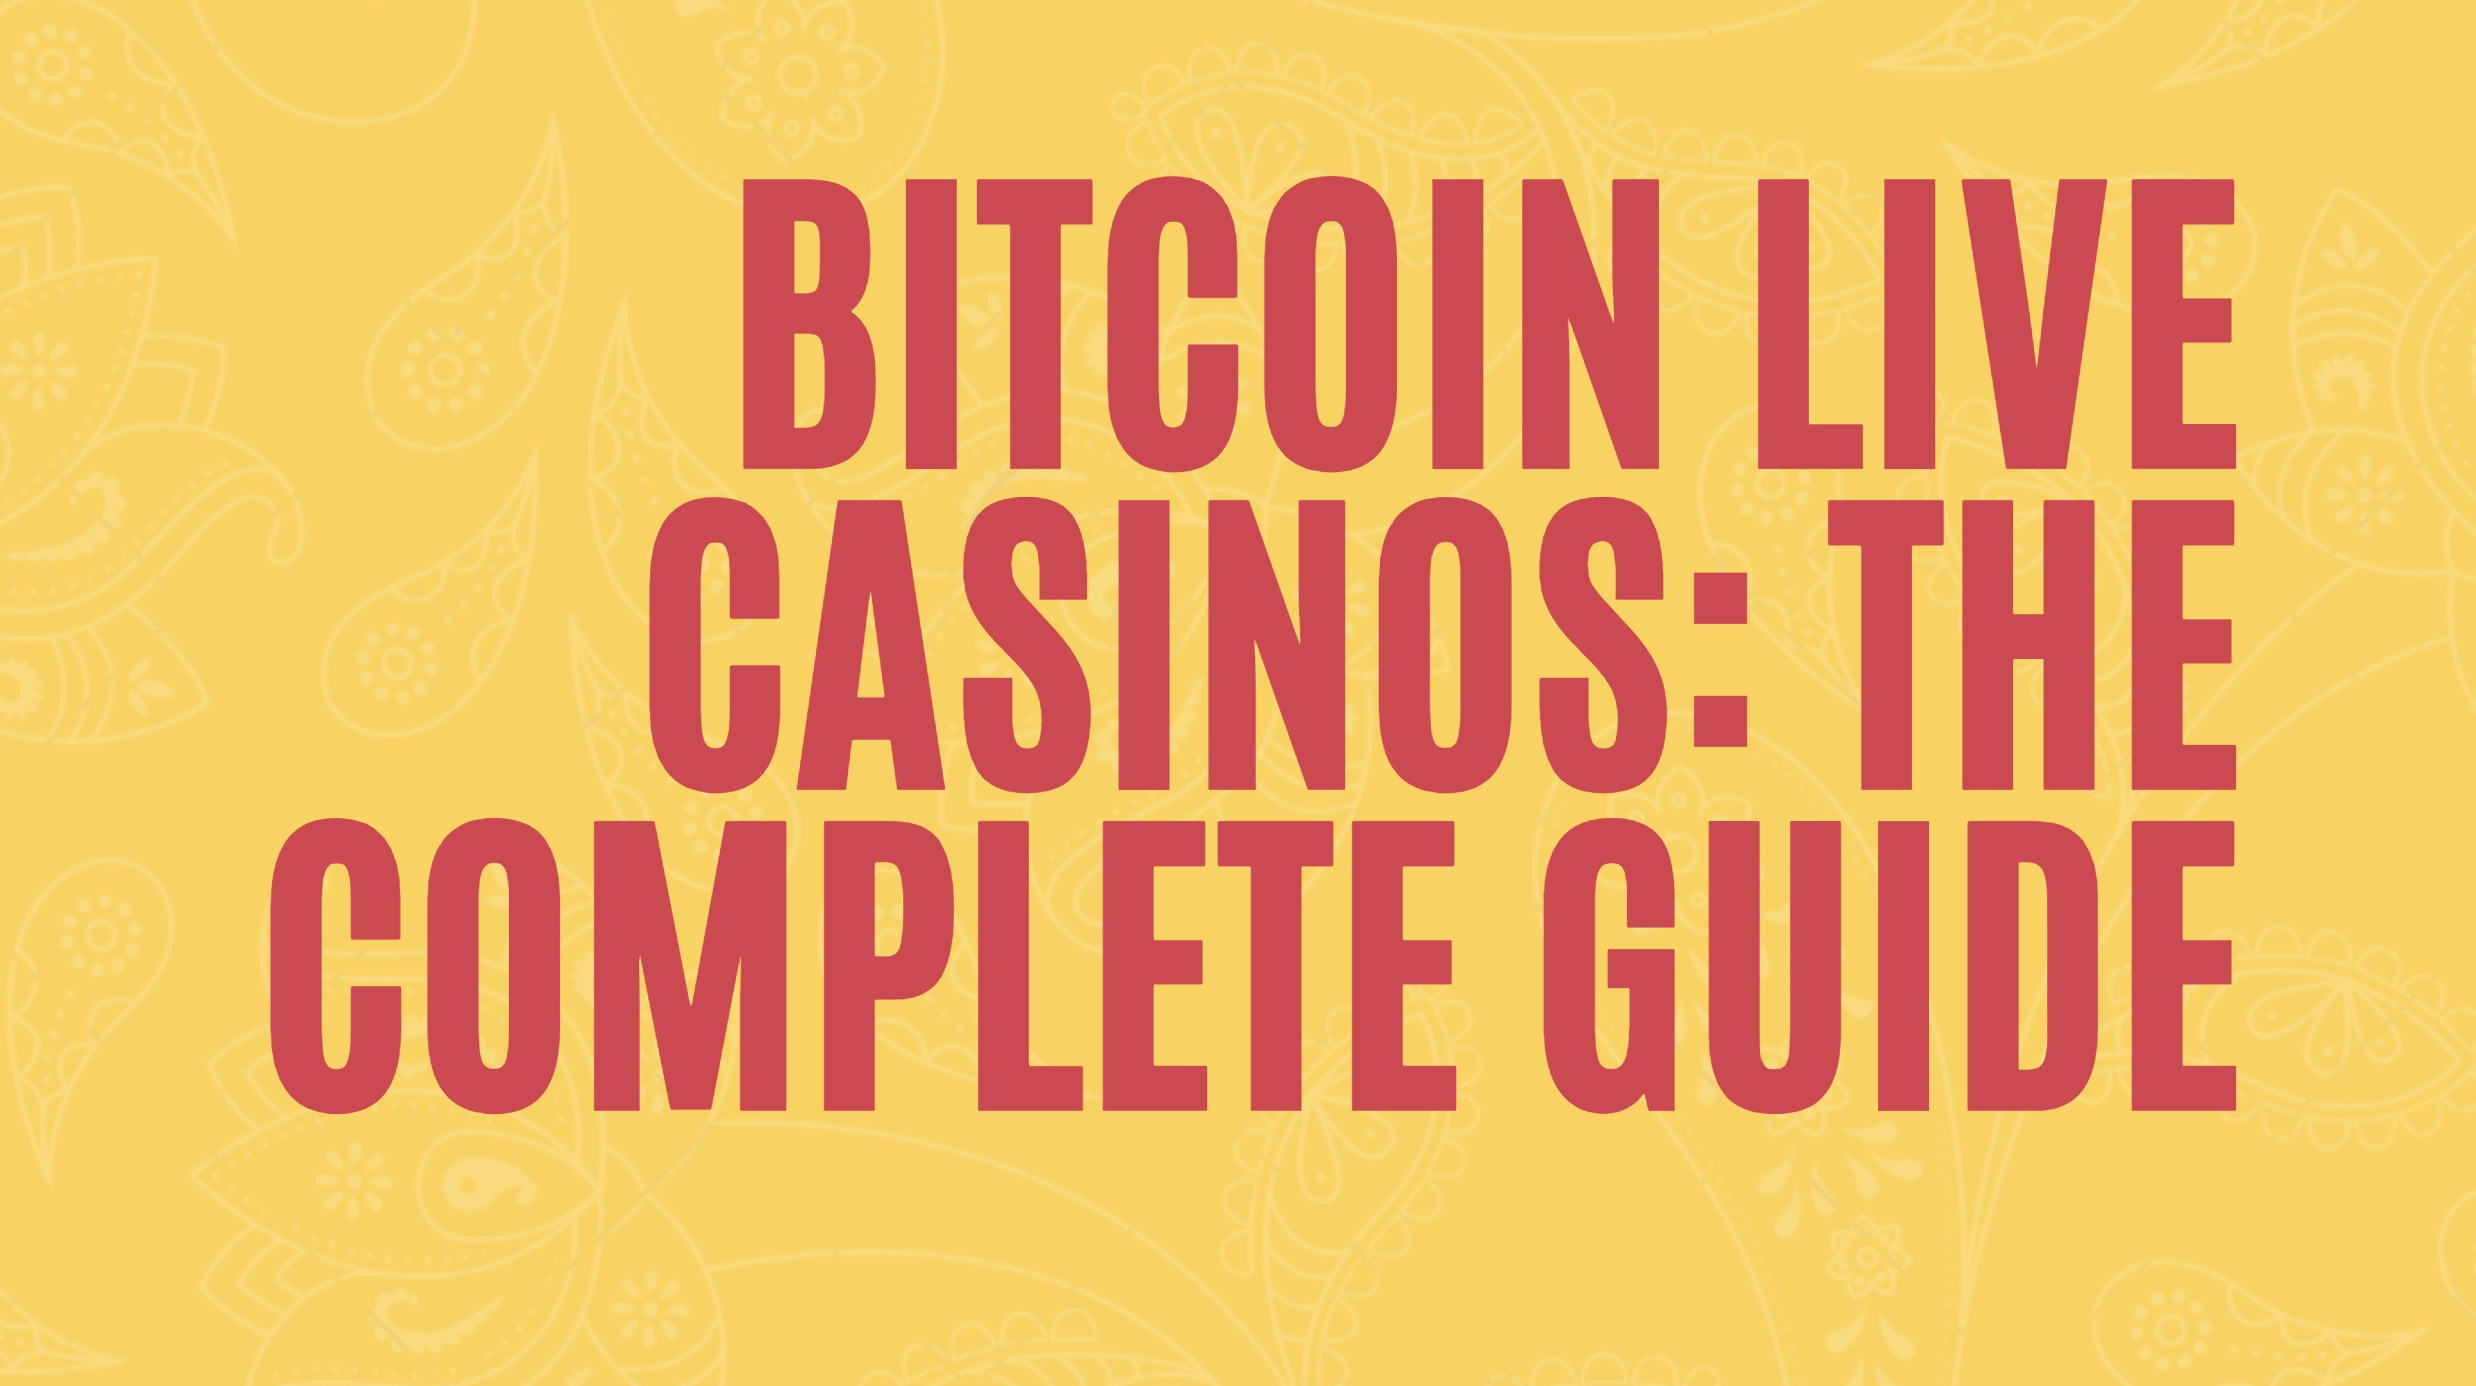 Bitcoin Live Casinos: The Complete Guide